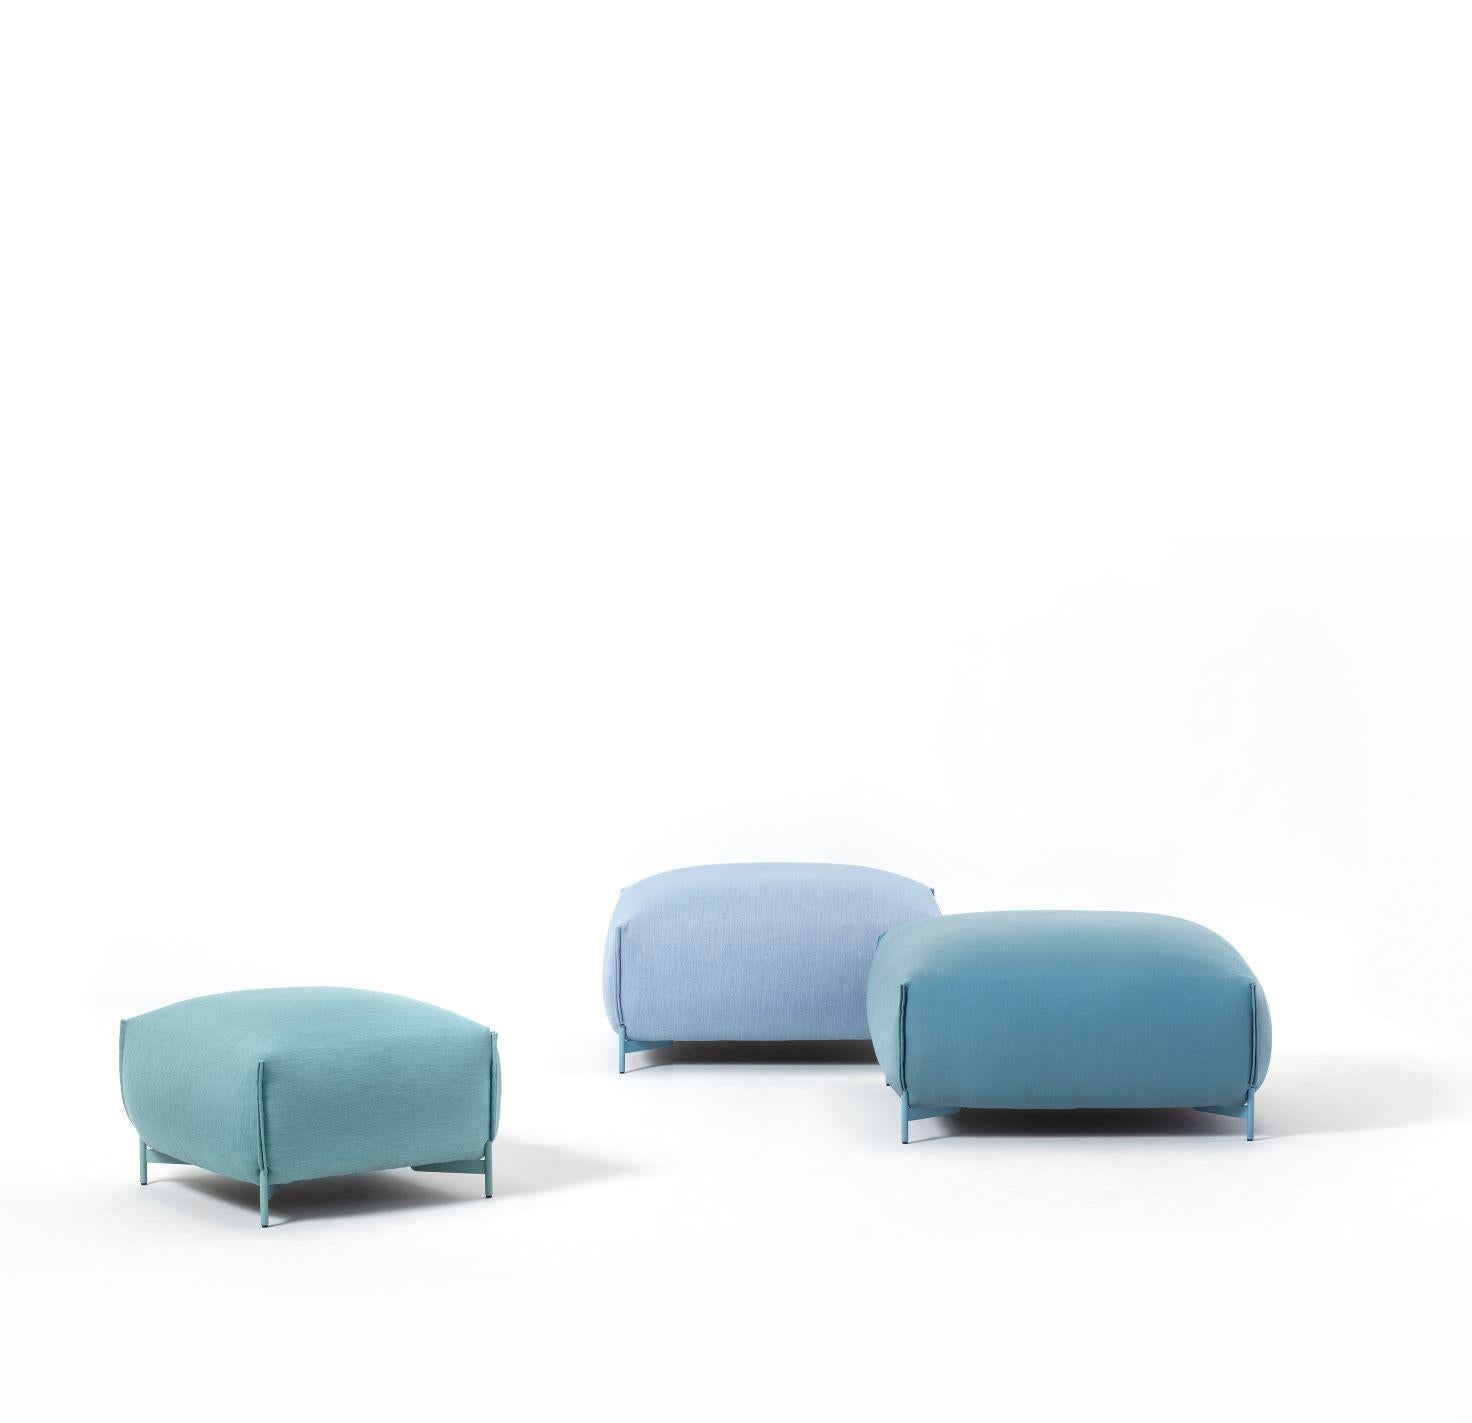 Pouf Mochi available in two sizes, Mochi pouf is the perfect comfort and style accessory for indoor and outdoor spaces.
Its generous shapes and plump padding are supported by slender painted metal feet and covered with fabric, leather, eco-leather